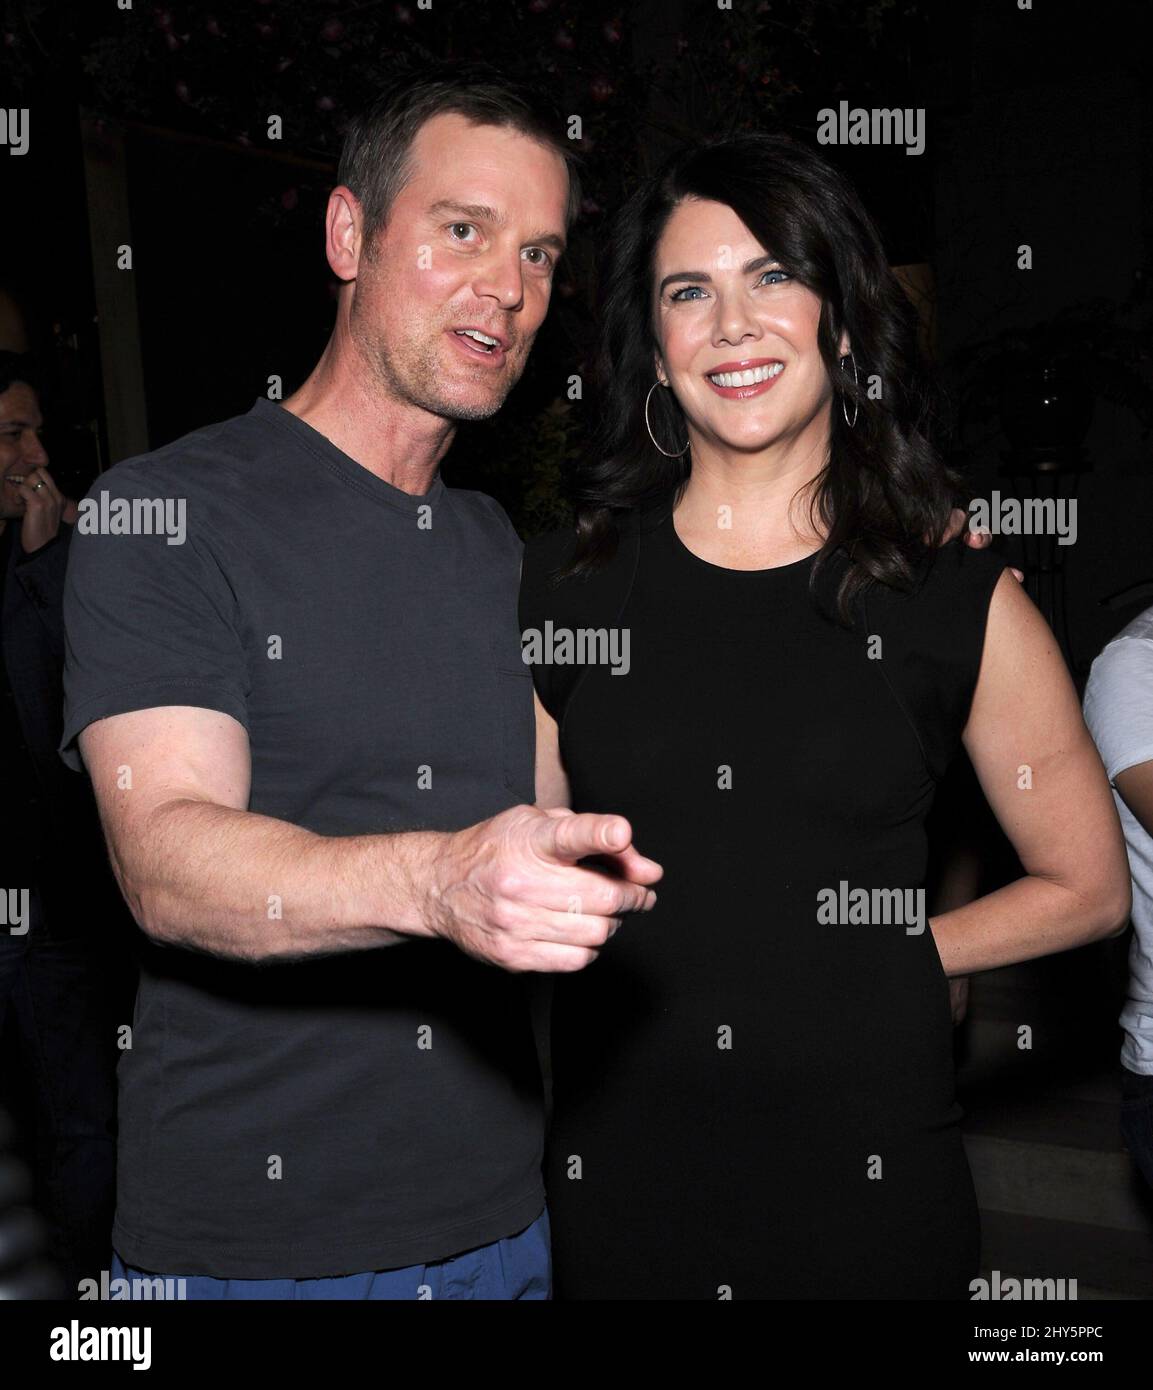 Peter Krause & Lauren Graham, attending the 100th Episode of Parenthood at Universal Studios in Hollywood, California. Stock Photo